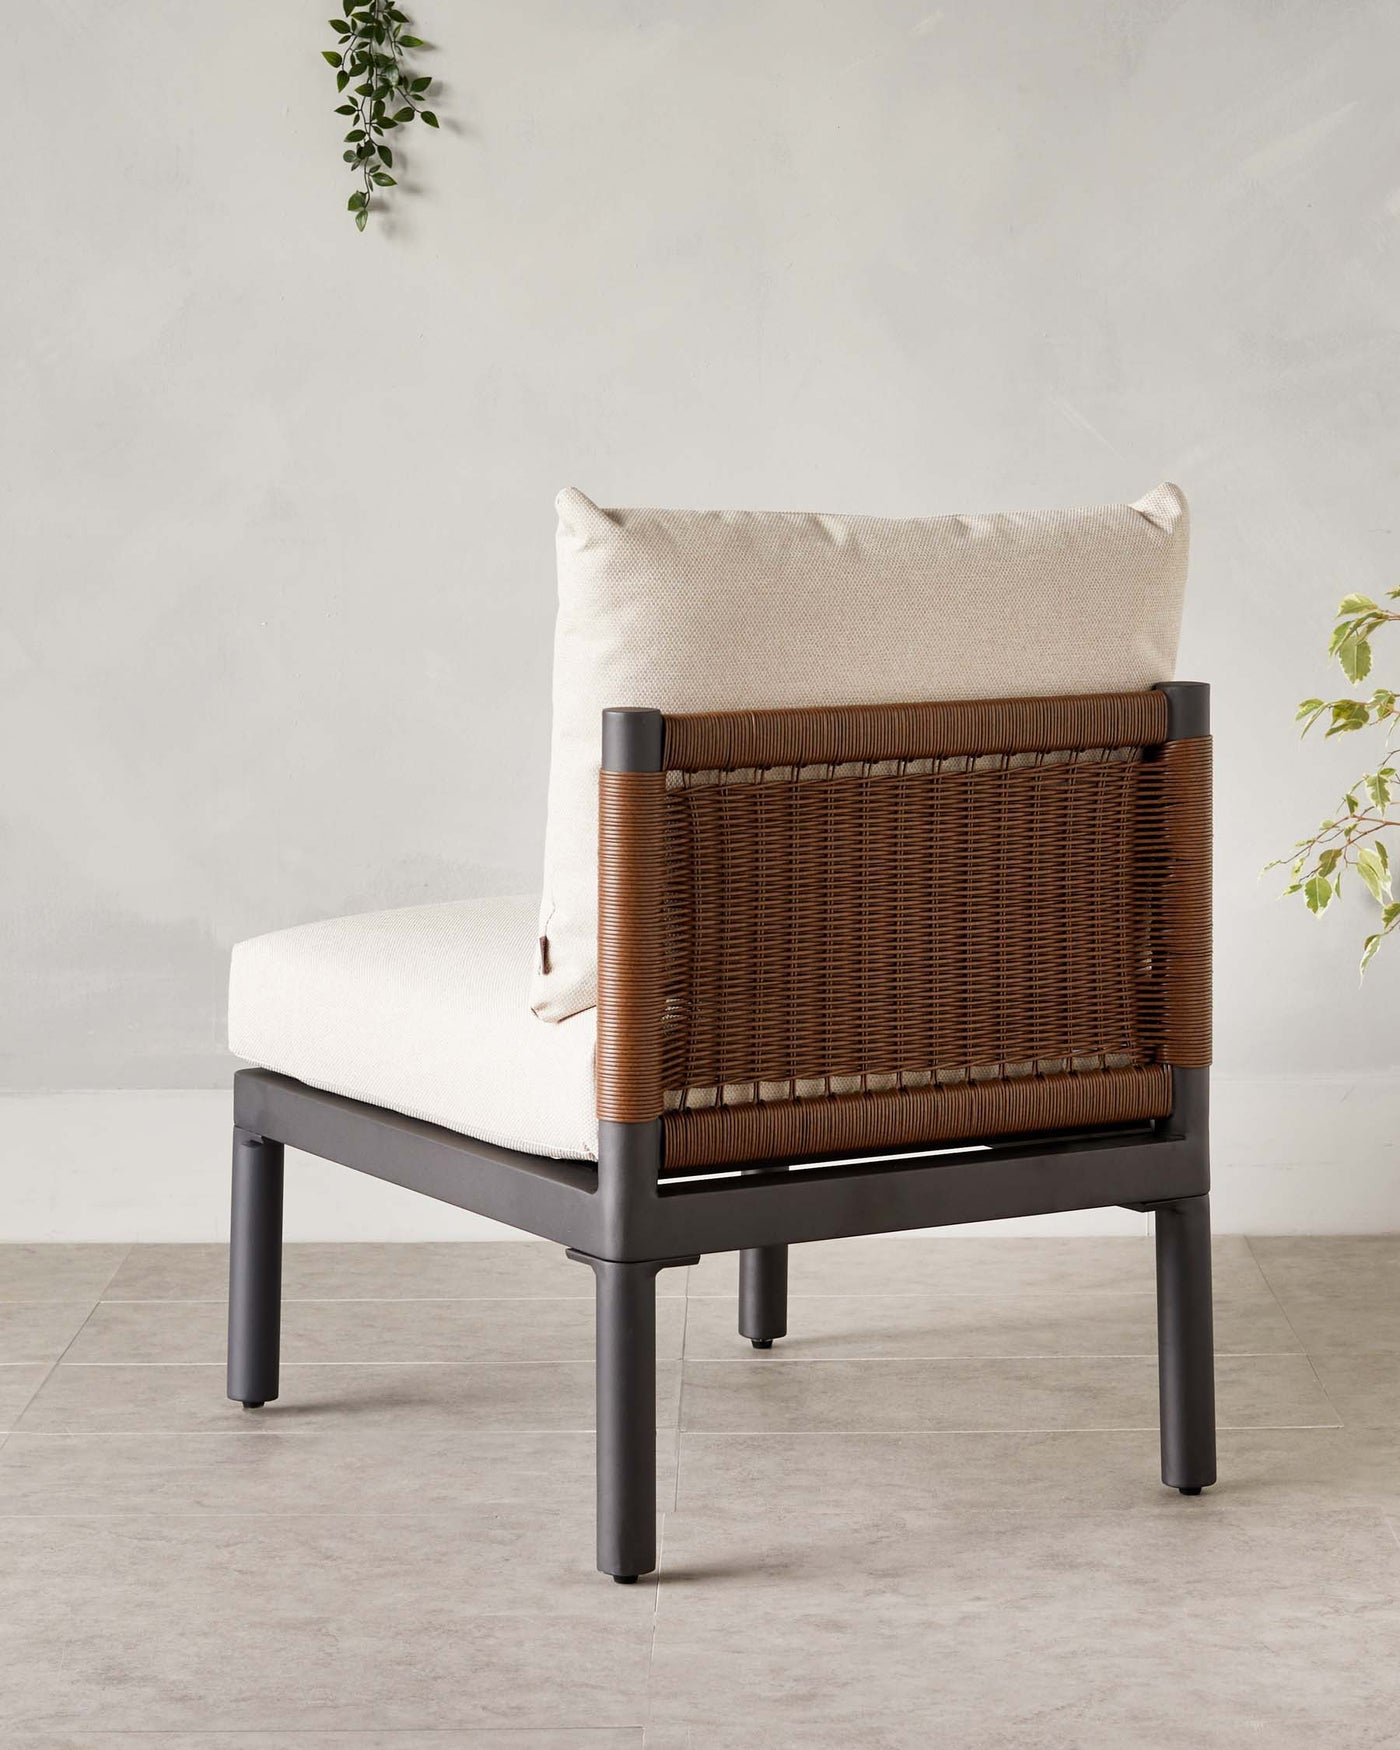 Modern armchair with a matte black wooden frame and woven rattan backrest; featuring a thick cushioned seat and a square accent pillow in a neutral beige fabric, against a textured light grey wall with hanging greenery.